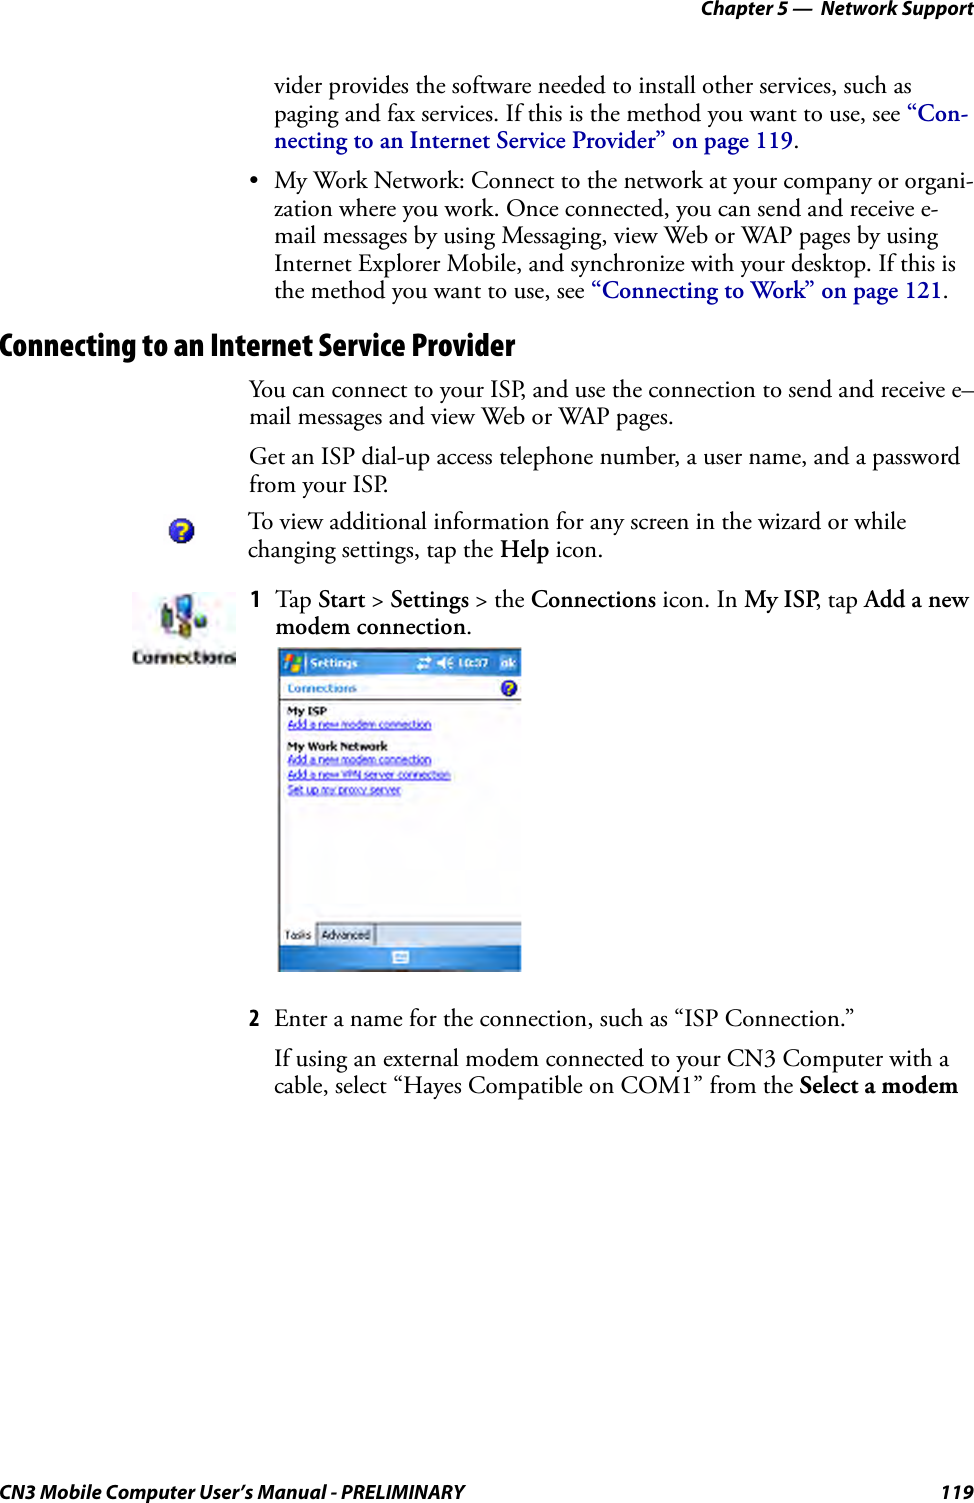 Chapter 5 —  Network SupportCN3 Mobile Computer User’s Manual - PRELIMINARY 119vider provides the software needed to install other services, such as paging and fax services. If this is the method you want to use, see “Con-necting to an Internet Service Provider” on page 119.• My Work Network: Connect to the network at your company or organi-zation where you work. Once connected, you can send and receive e-mail messages by using Messaging, view Web or WAP pages by using Internet Explorer Mobile, and synchronize with your desktop. If this is the method you want to use, see “Connecting to Work” on page 121.Connecting to an Internet Service ProviderYou can connect to your ISP, and use the connection to send and receive e–mail messages and view Web or WAP pages.Get an ISP dial-up access telephone number, a user name, and a password from your ISP.2Enter a name for the connection, such as “ISP Connection.” If using an external modem connected to your CN3 Computer with a cable, select “Hayes Compatible on COM1” from the Select a modem To view additional information for any screen in the wizard or while changing settings, tap the Help icon.1Tap  Start &gt; Settings &gt; the Connections icon. In My ISP, tap Add a new modem connection.